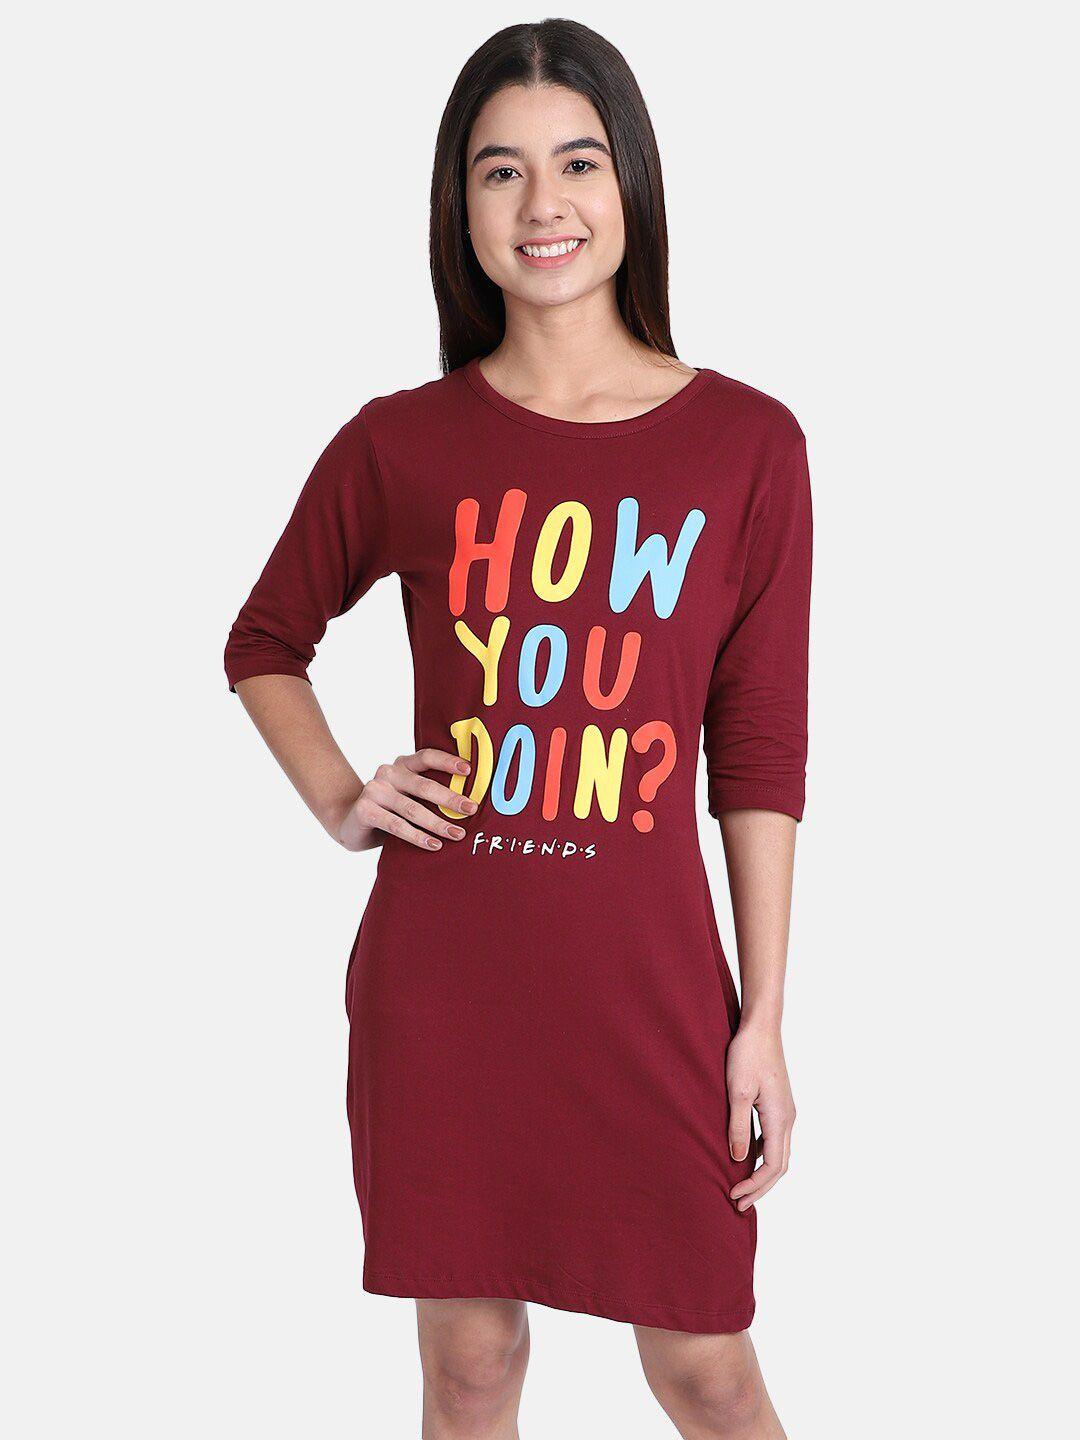 free authority women maroon friends printed t-shirt style dress